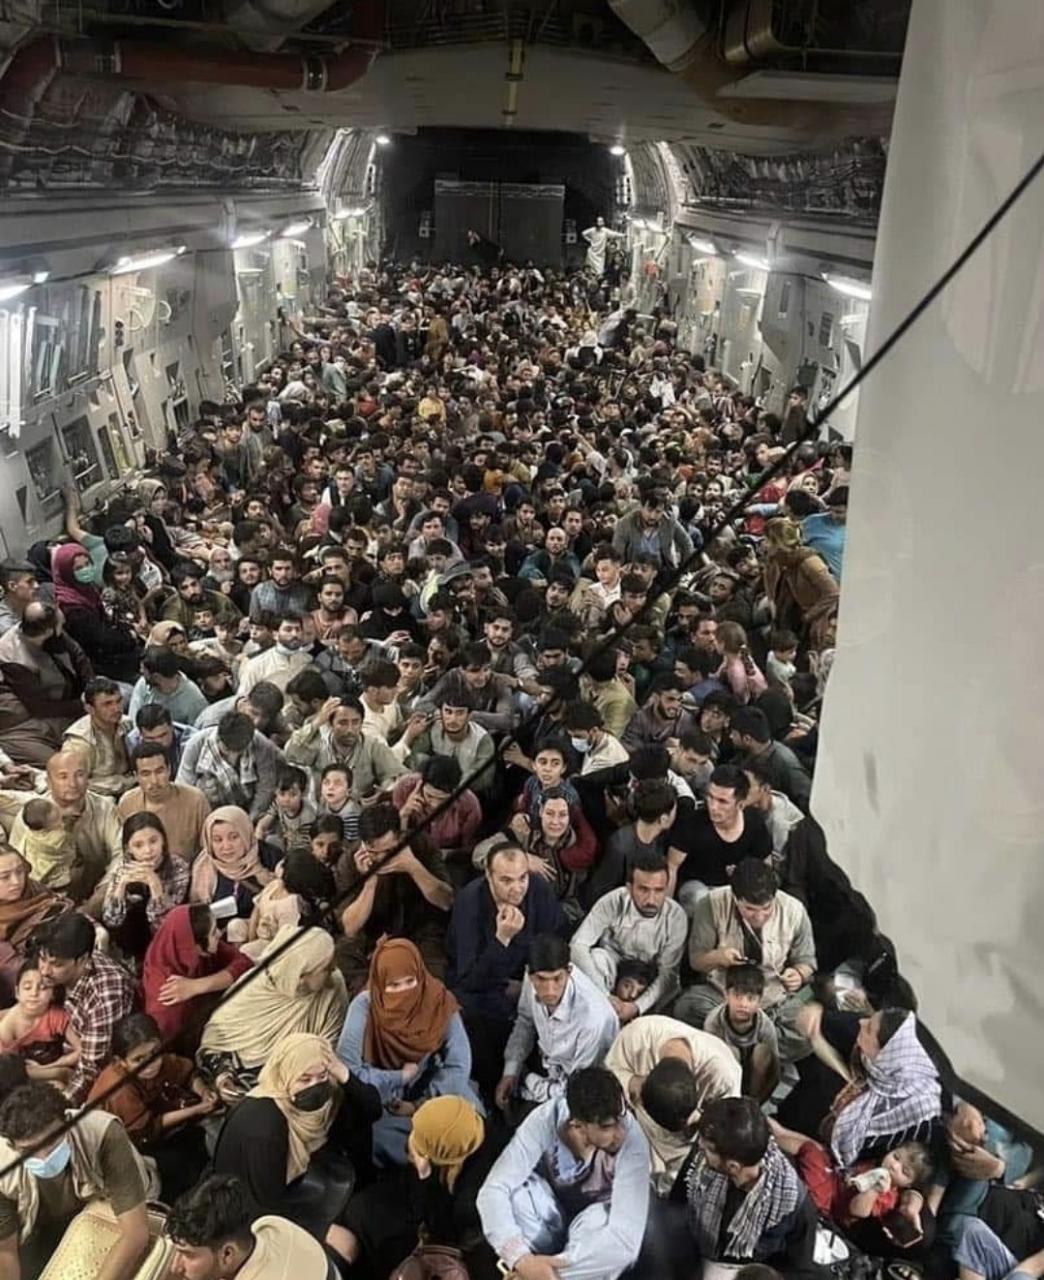 See photo showing inside a US military aircraft evacuating Afghans from Kabul to Qatar 